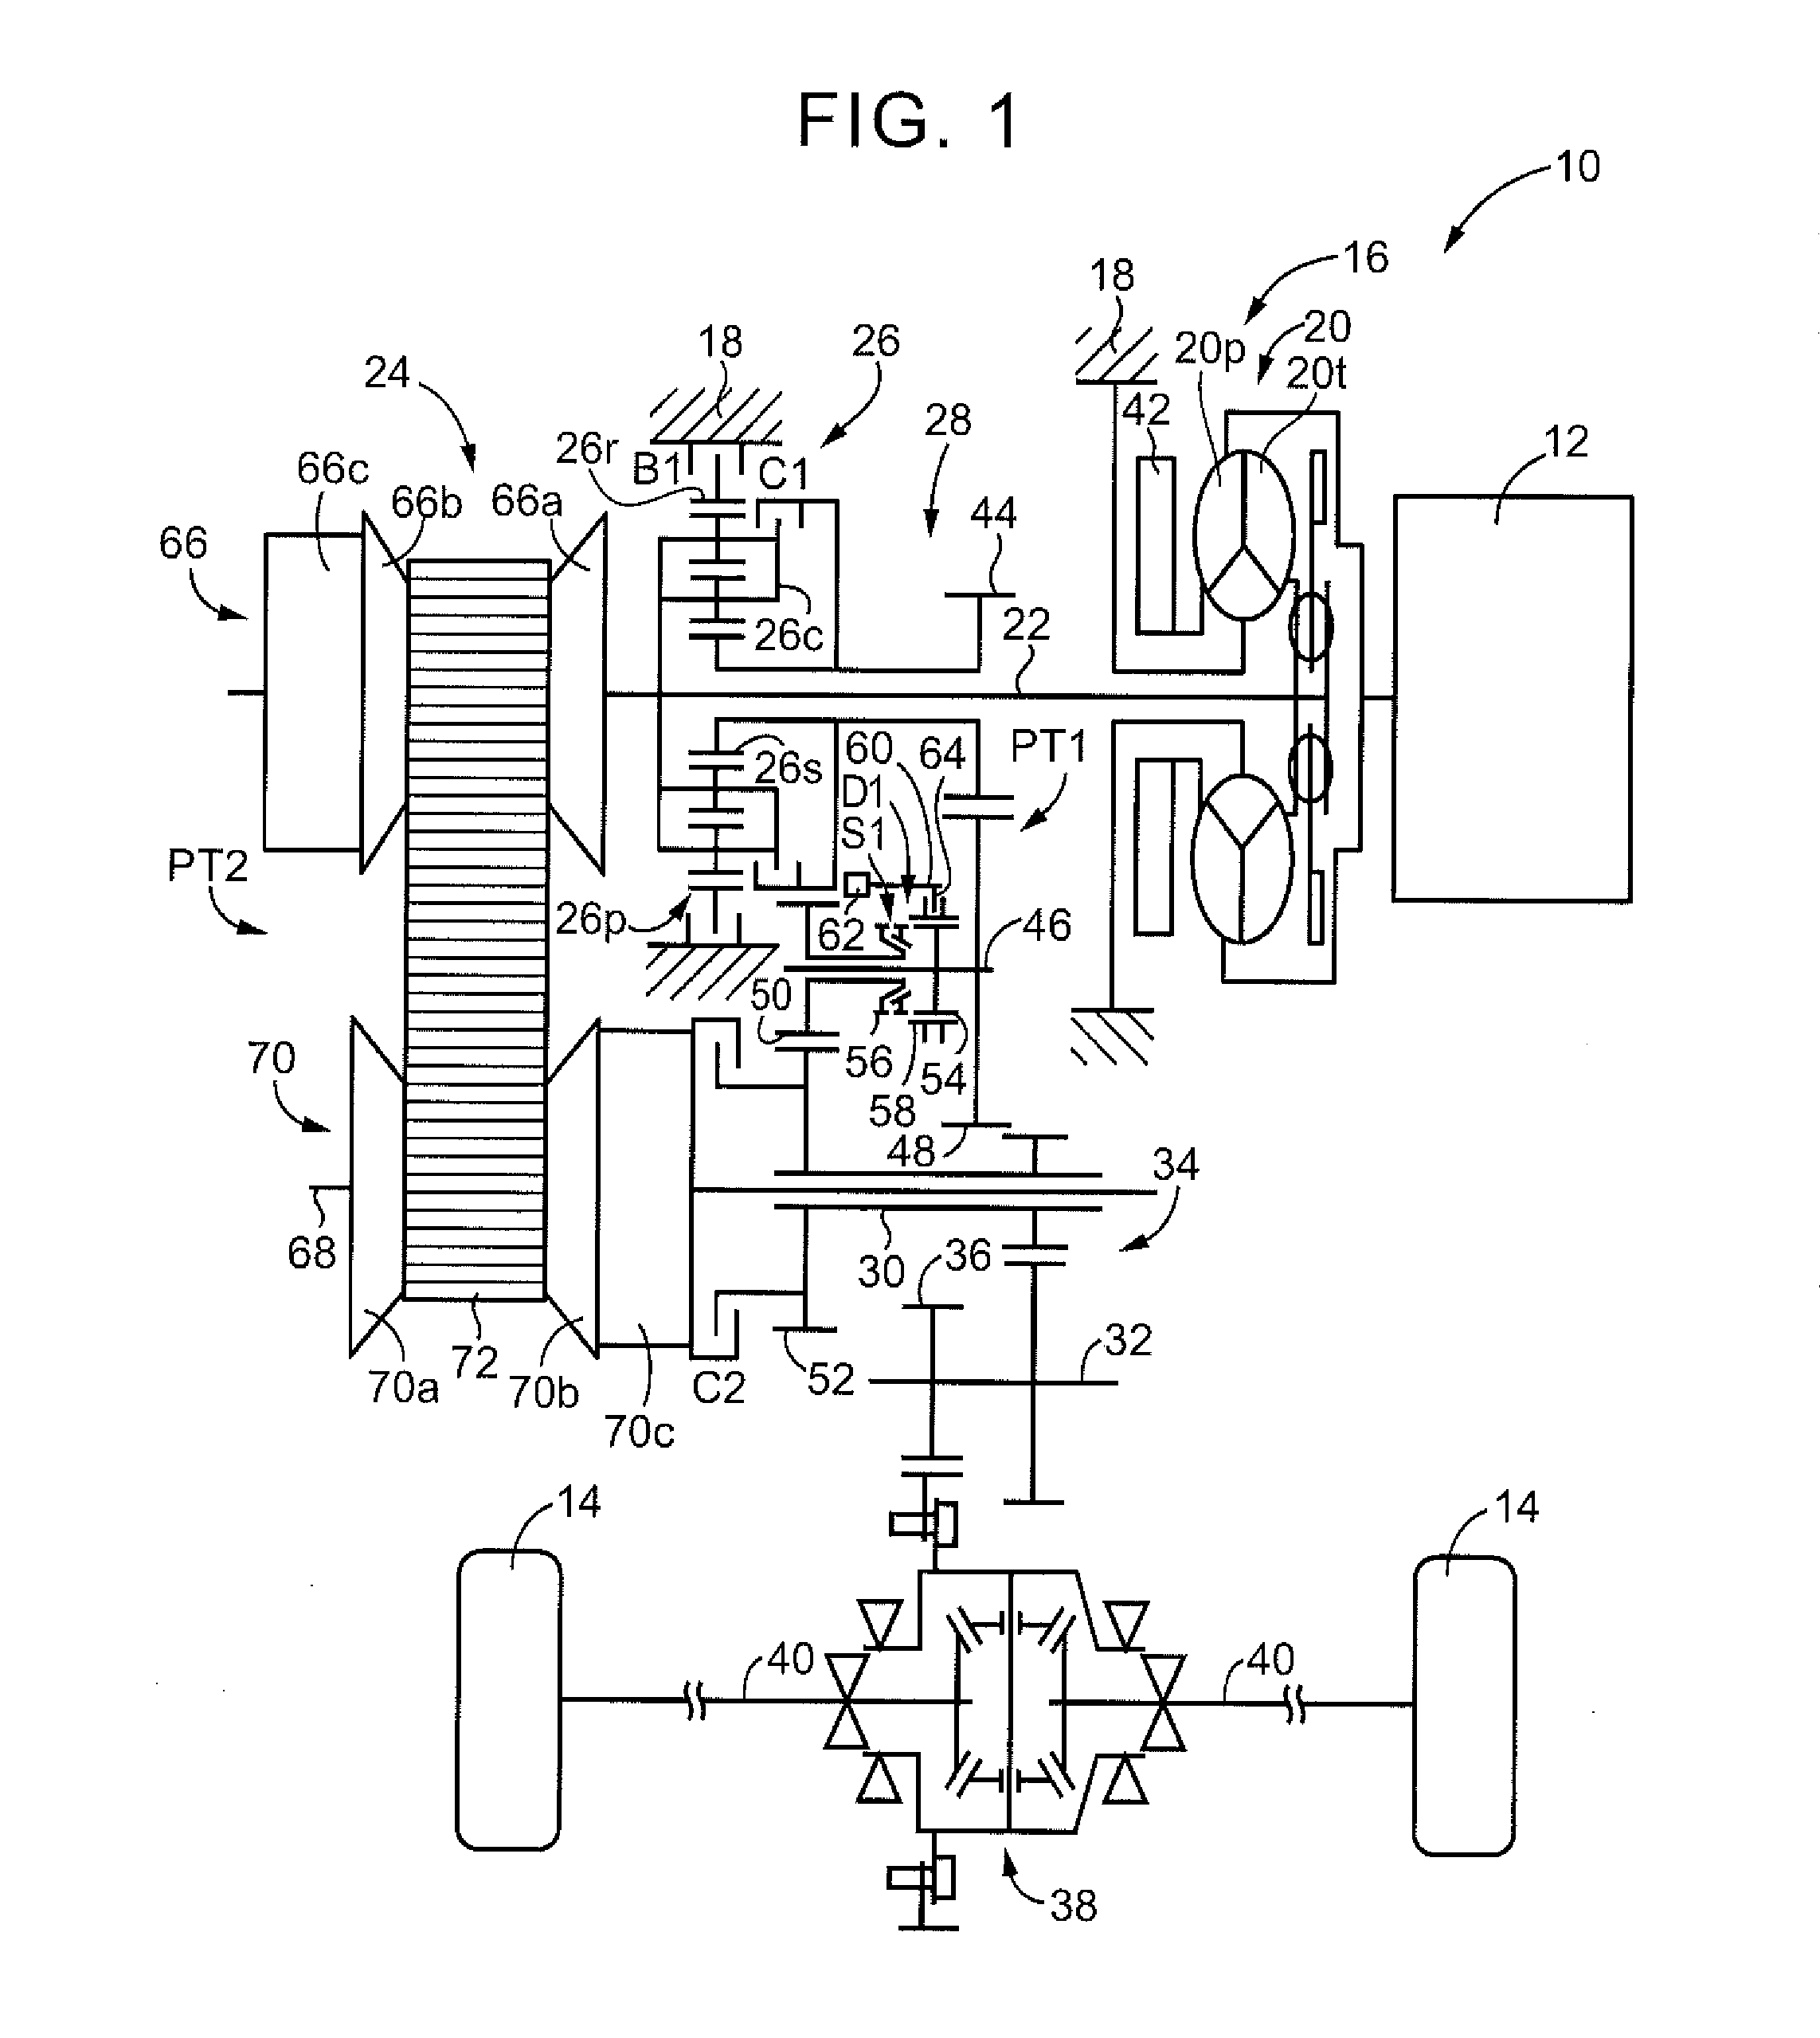 Control apparatus for power transmission system